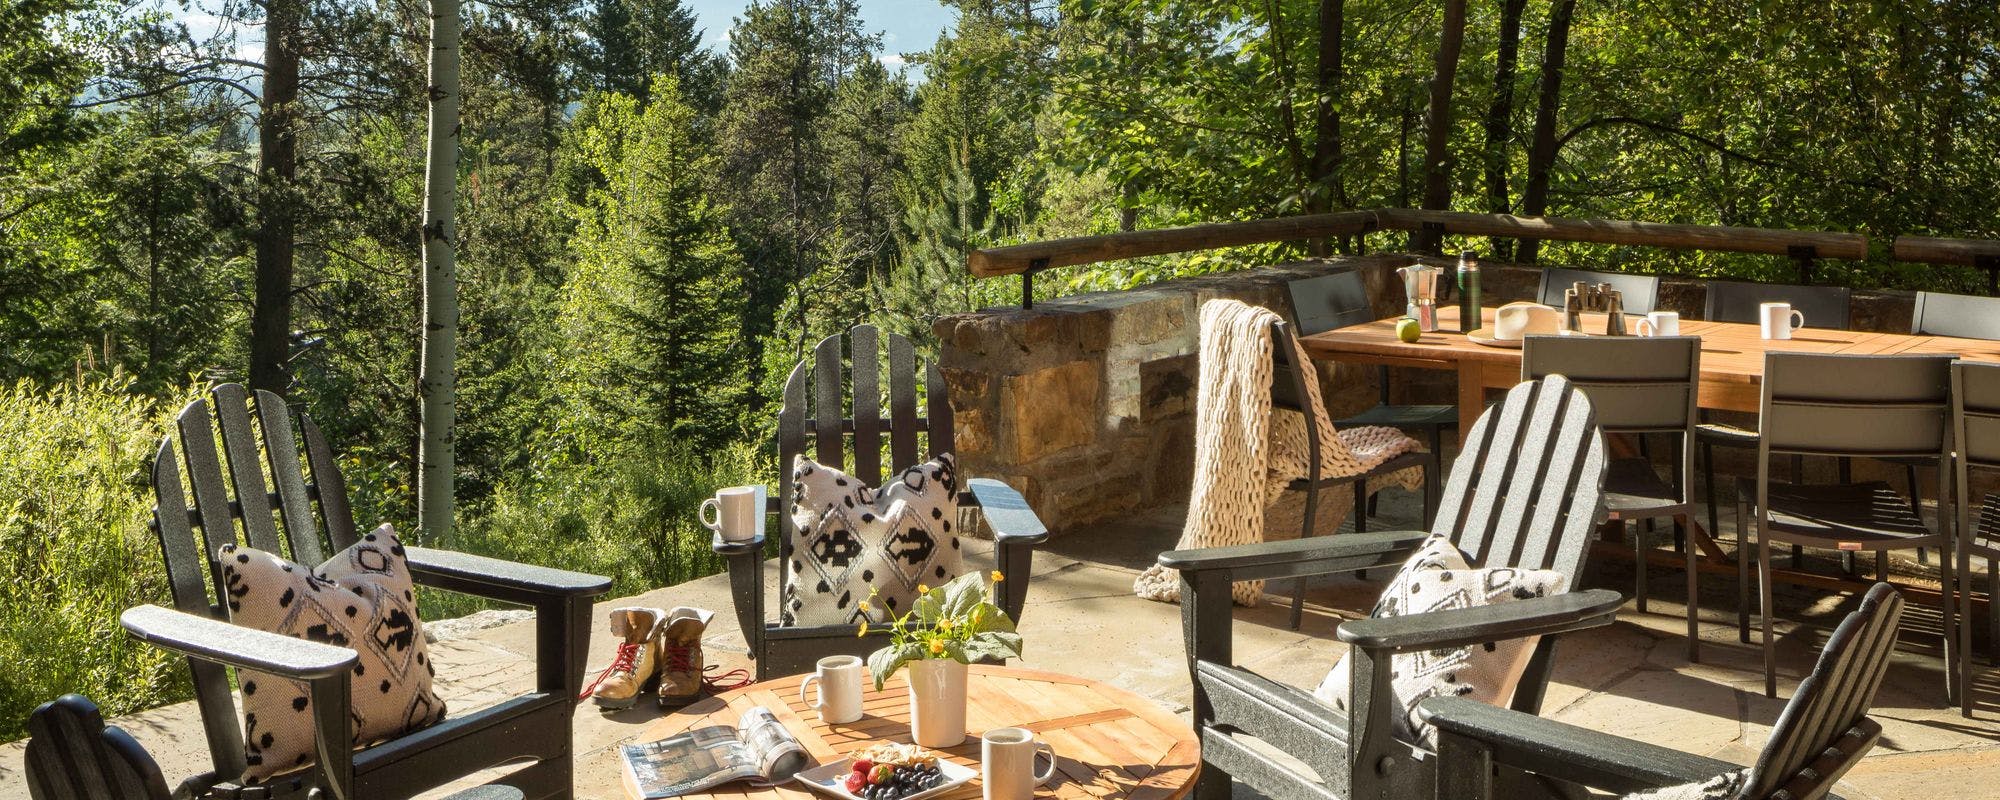 Plentiful outdoor living space at Jackson Hole vacation rental